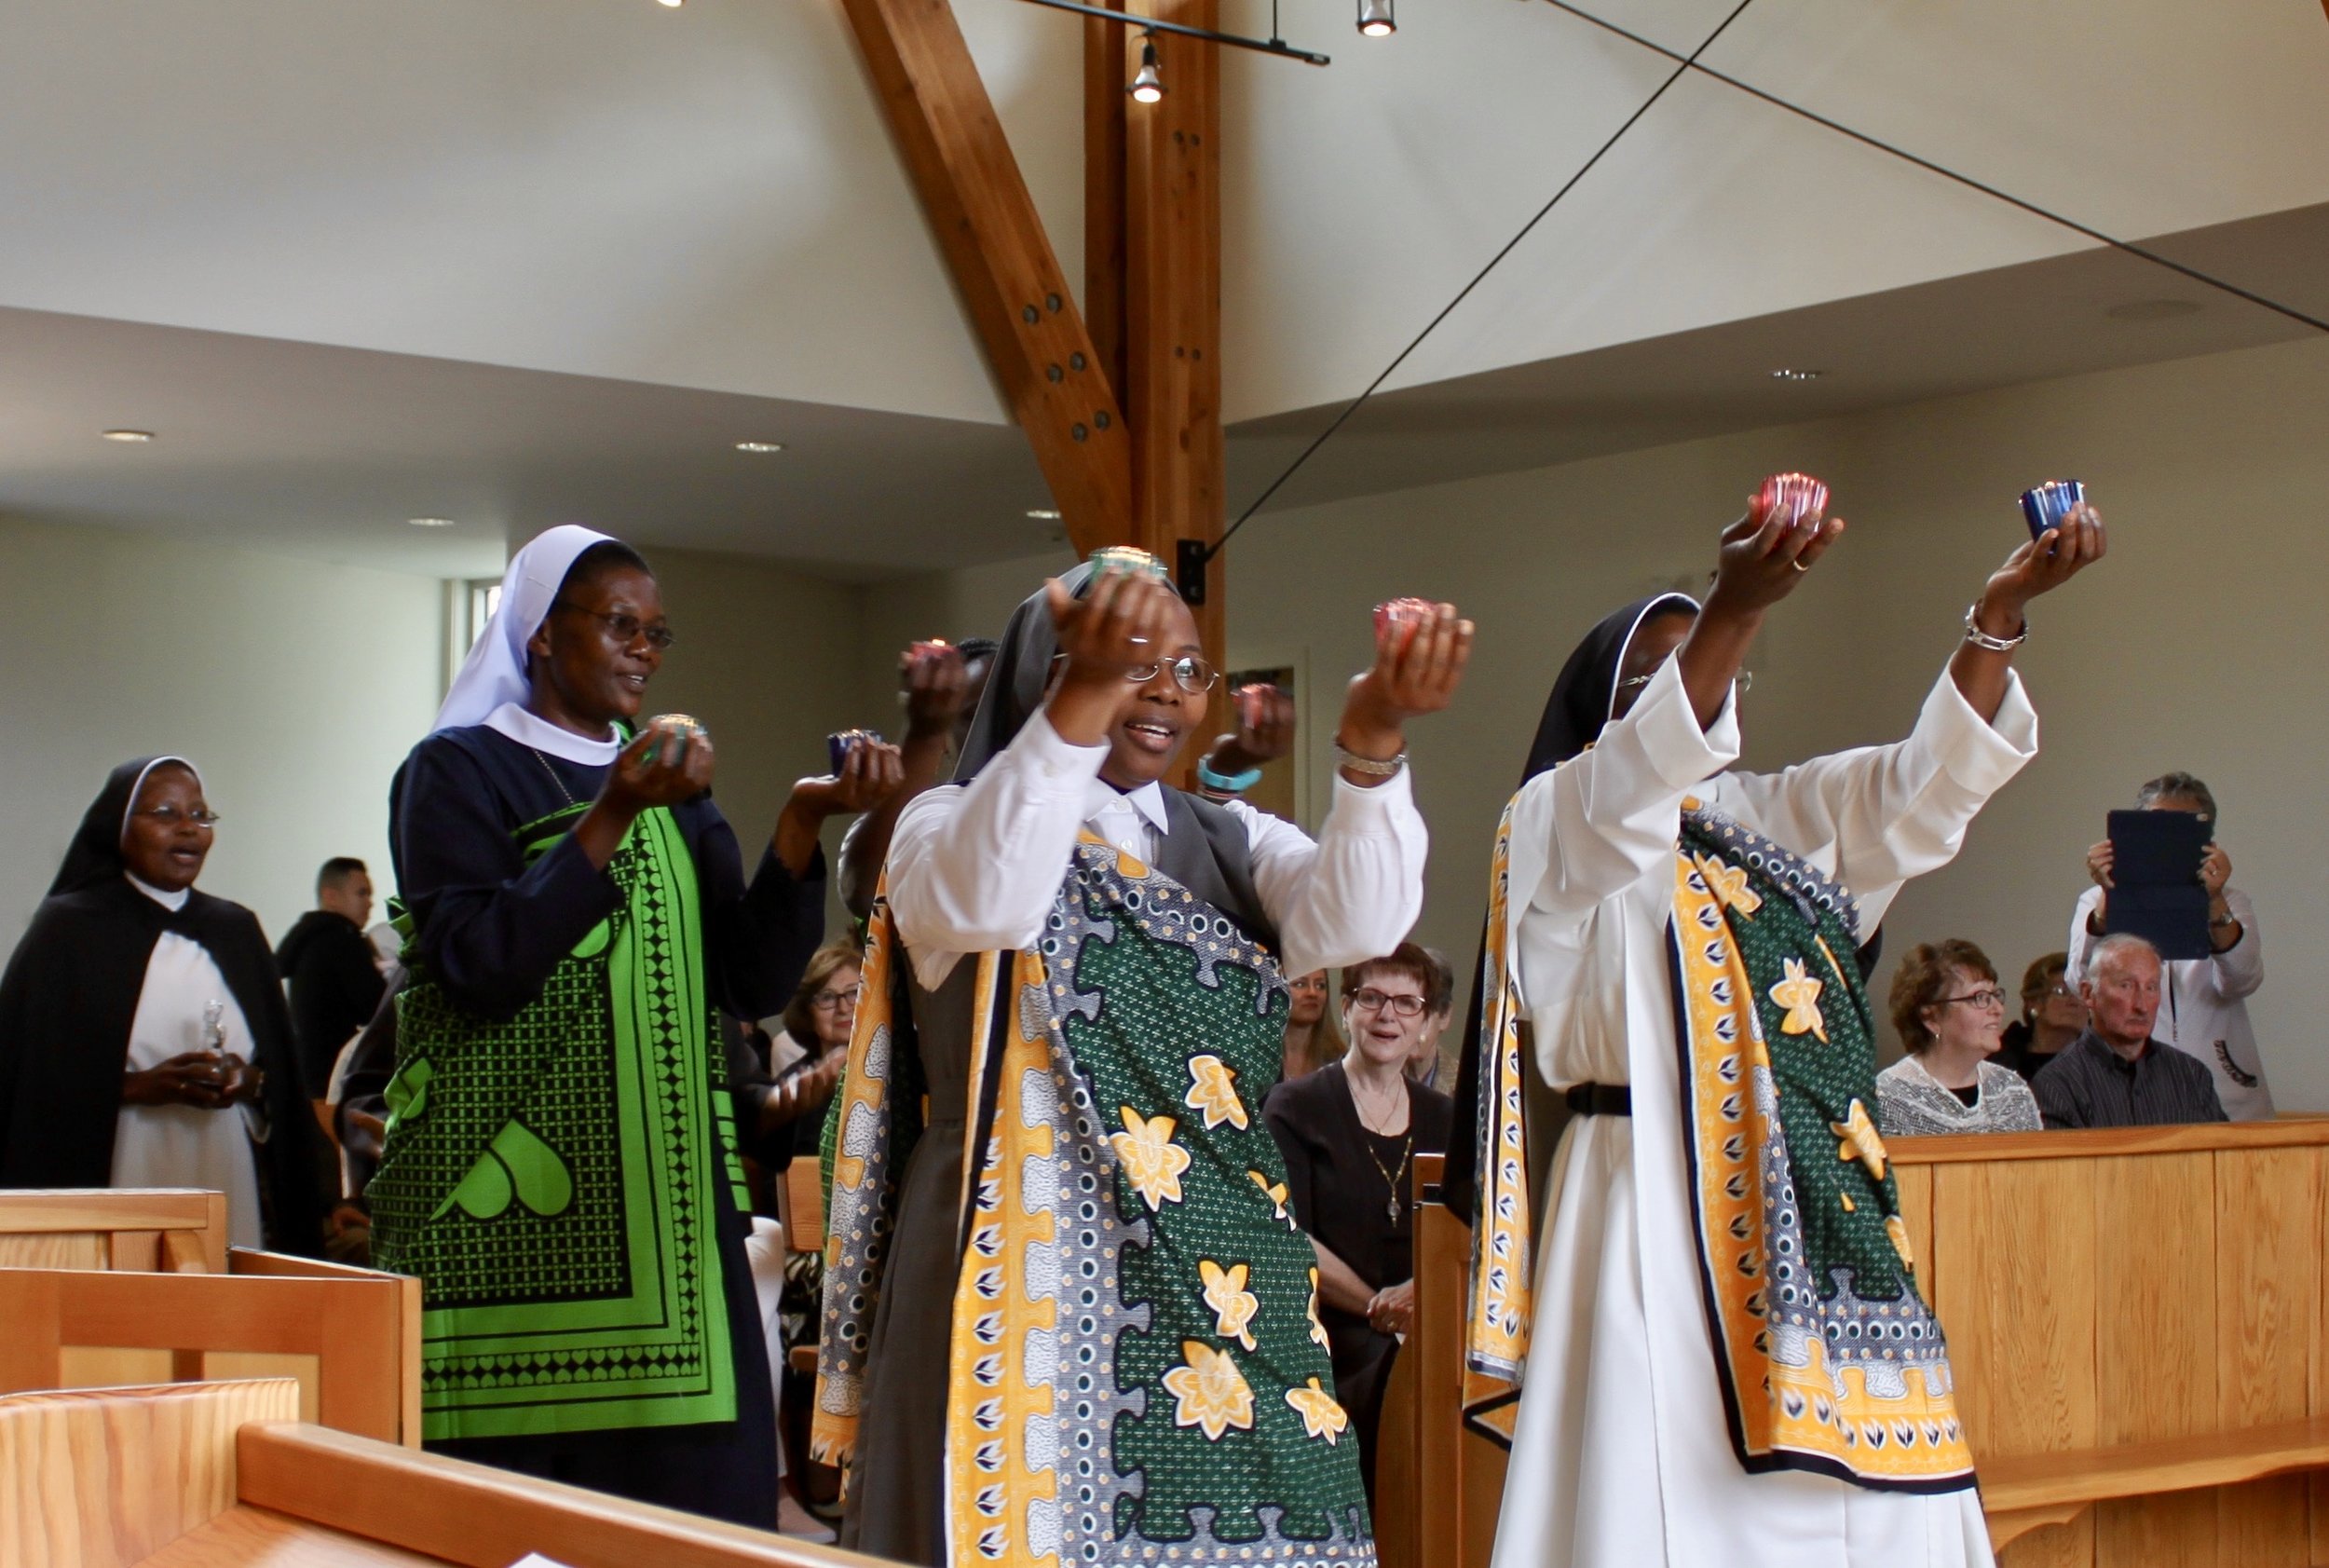  The offeratory procession was graced by Sister’s friends and family members from Tanzania and Kenya. 